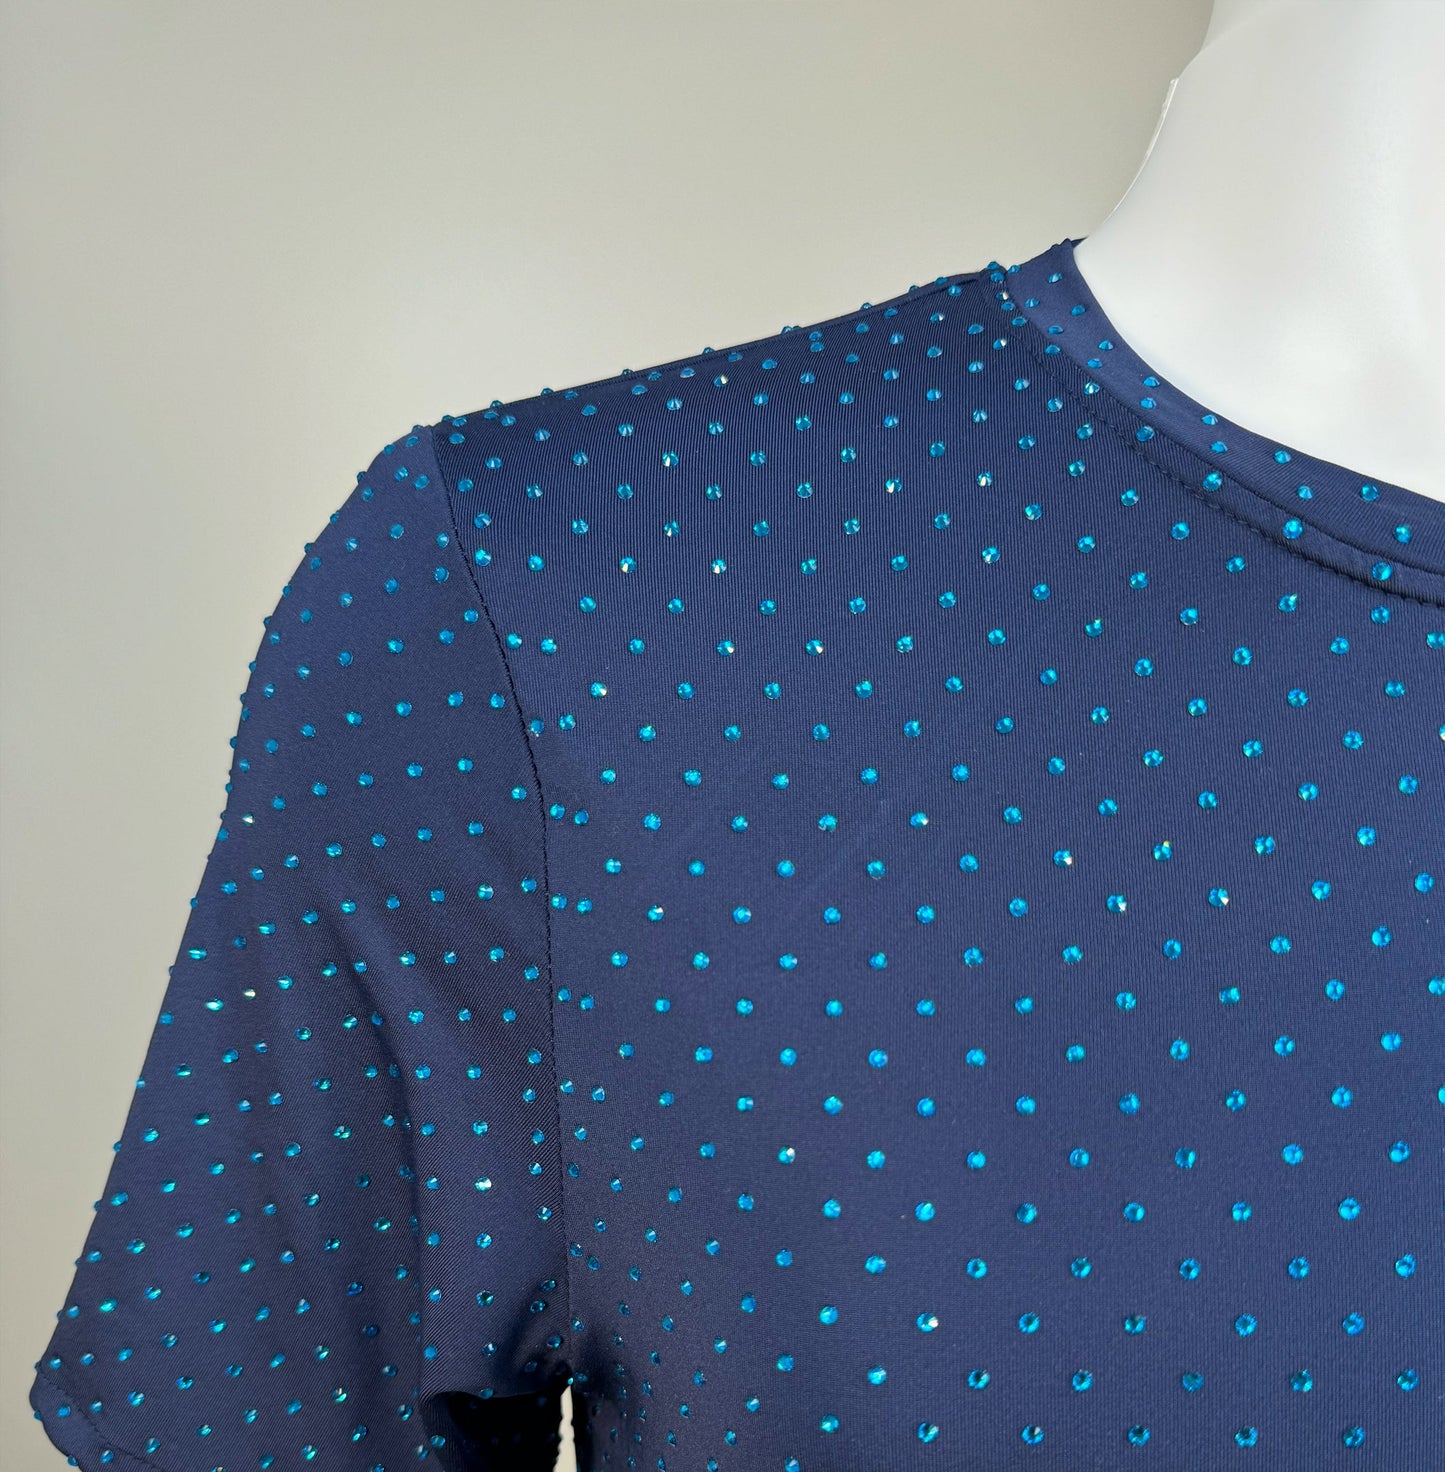 Shoulder detail of Capri Blue Crystals on Navy Fabric Dotted T-shirt revealing the impeccable construction of this complex garment.